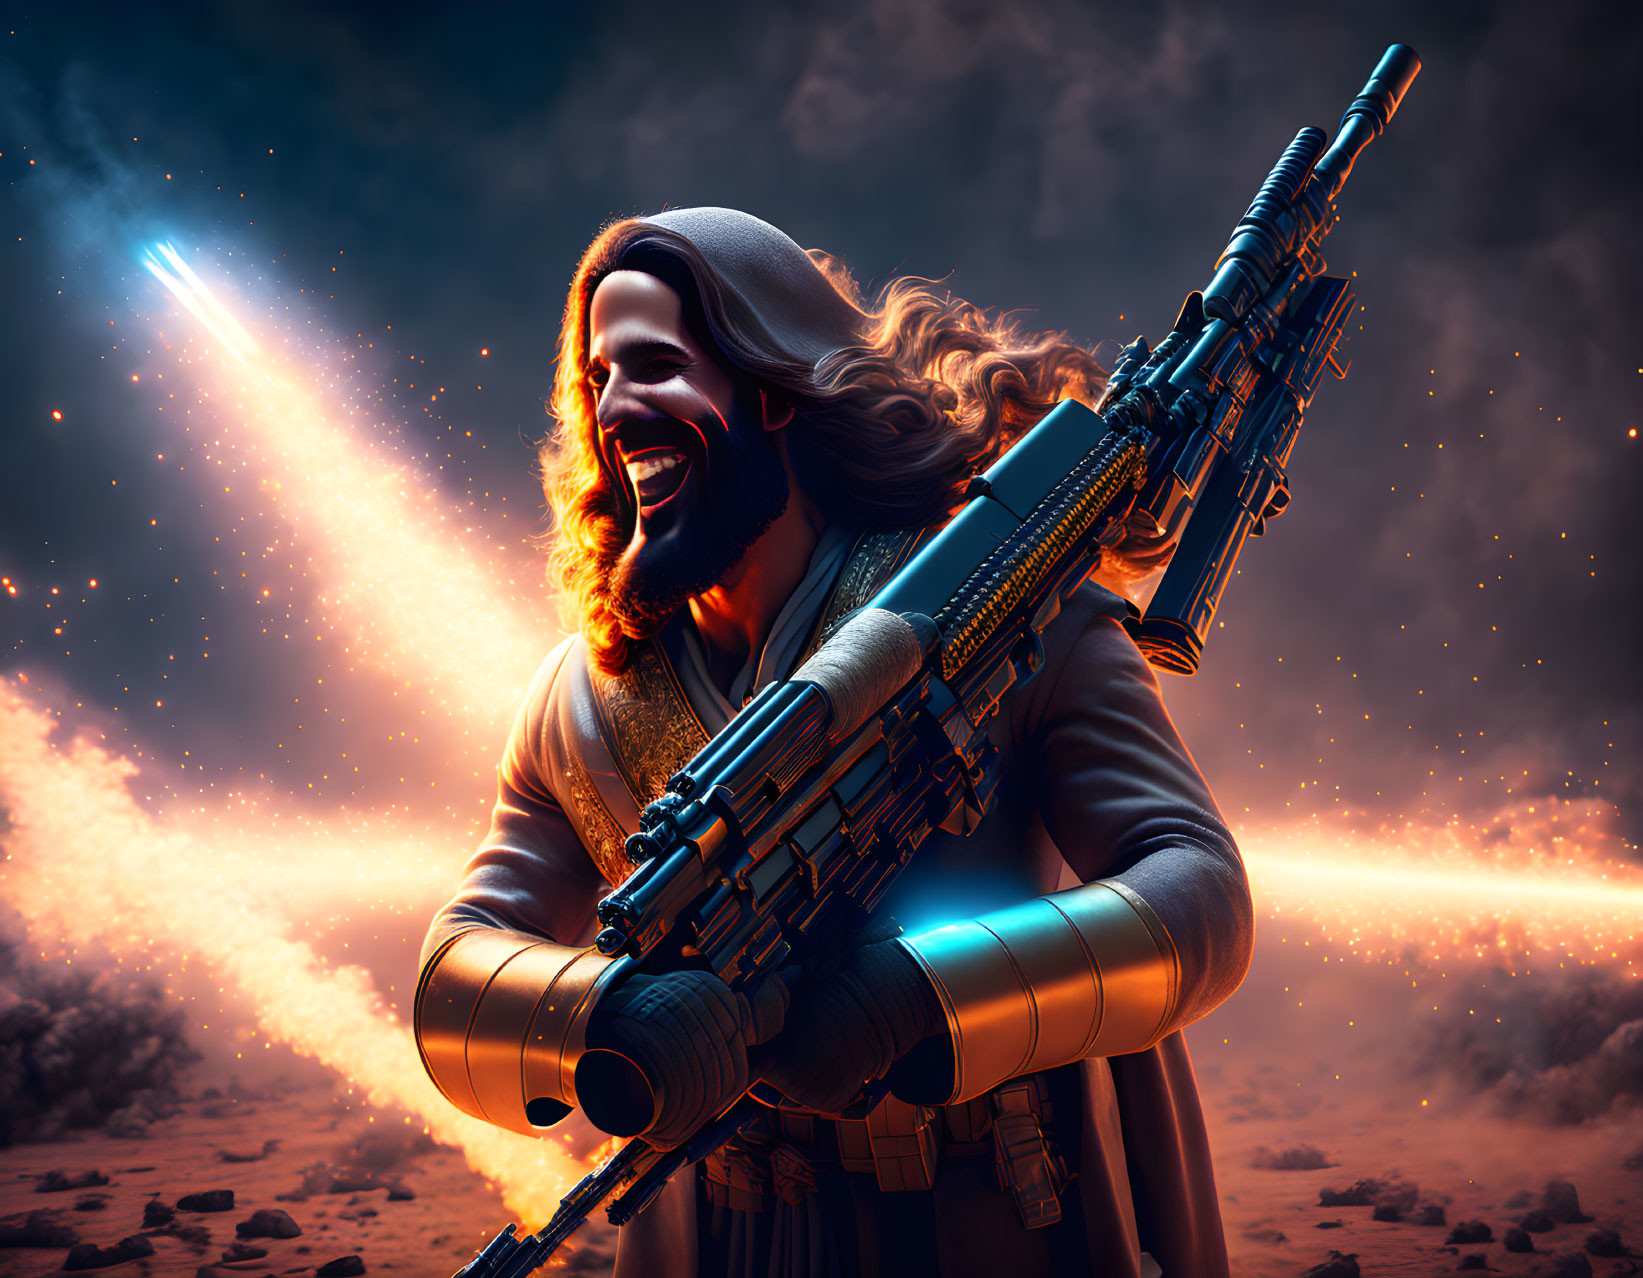 Smiling man in futuristic armor with rifle under starry sky